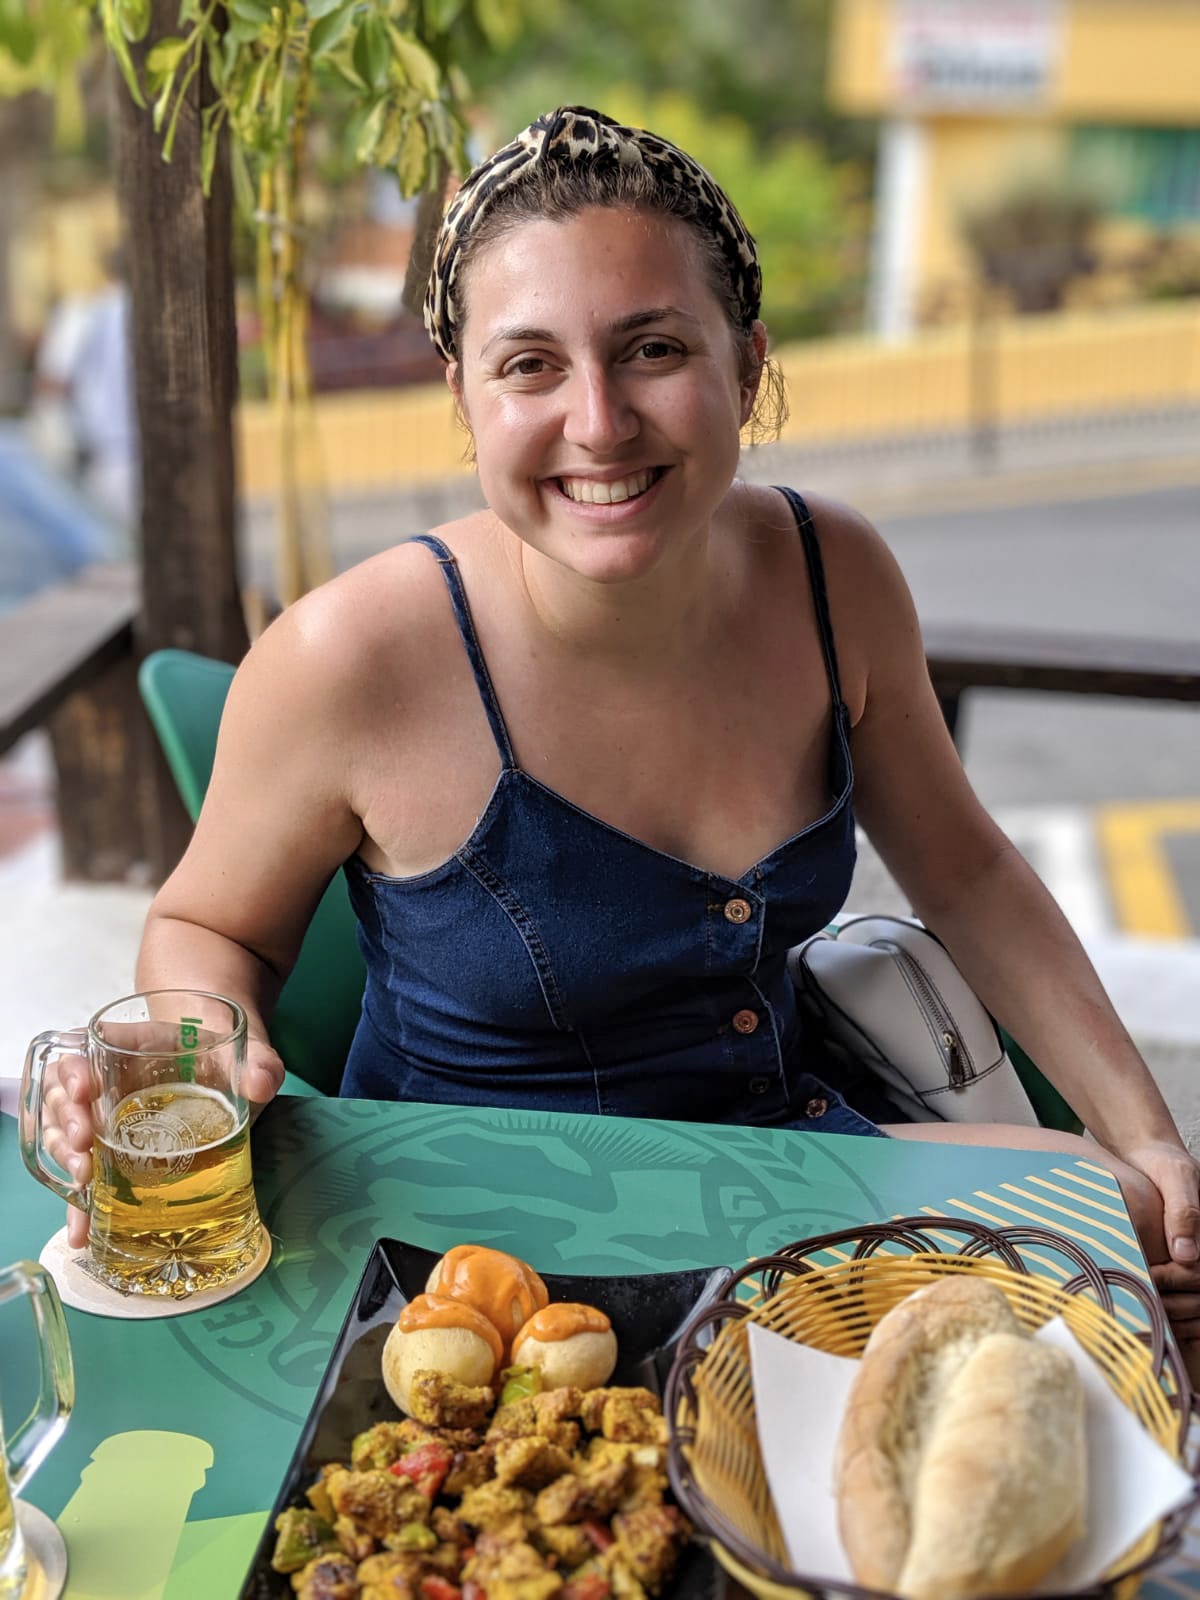 Girl looking into camera and smiling, with a beer and plate of potatoes in front of her. Taken in a roadside cafe in gran canaria.